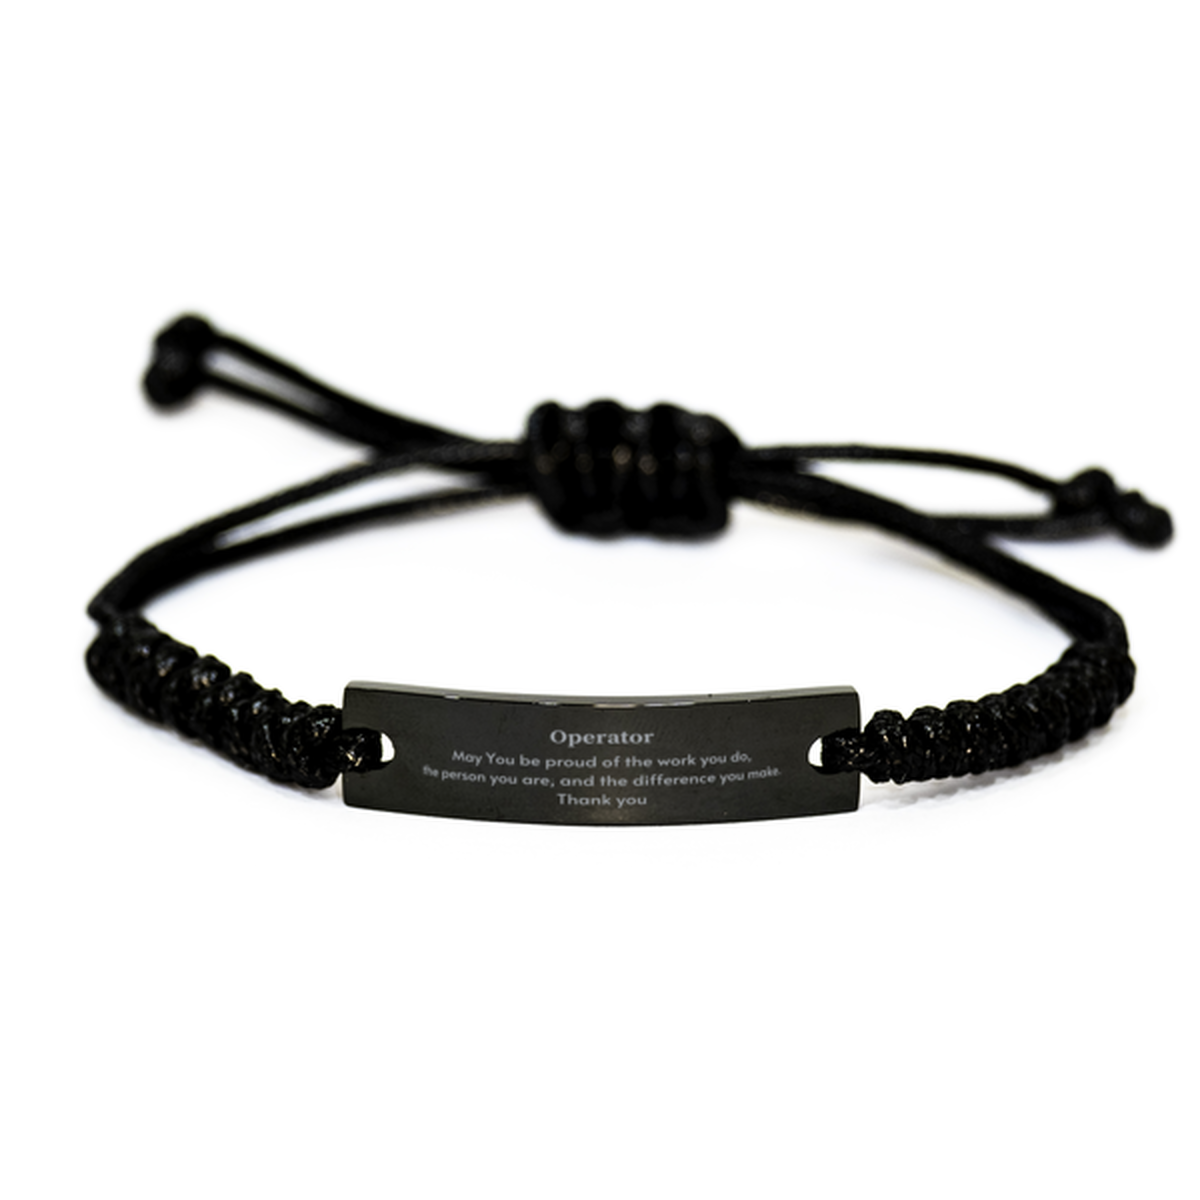 Heartwarming Black Rope Bracelet Retirement Coworkers Gifts for Operator, Operator May You be proud of the work you do, the person you are Gifts for Boss Men Women Friends